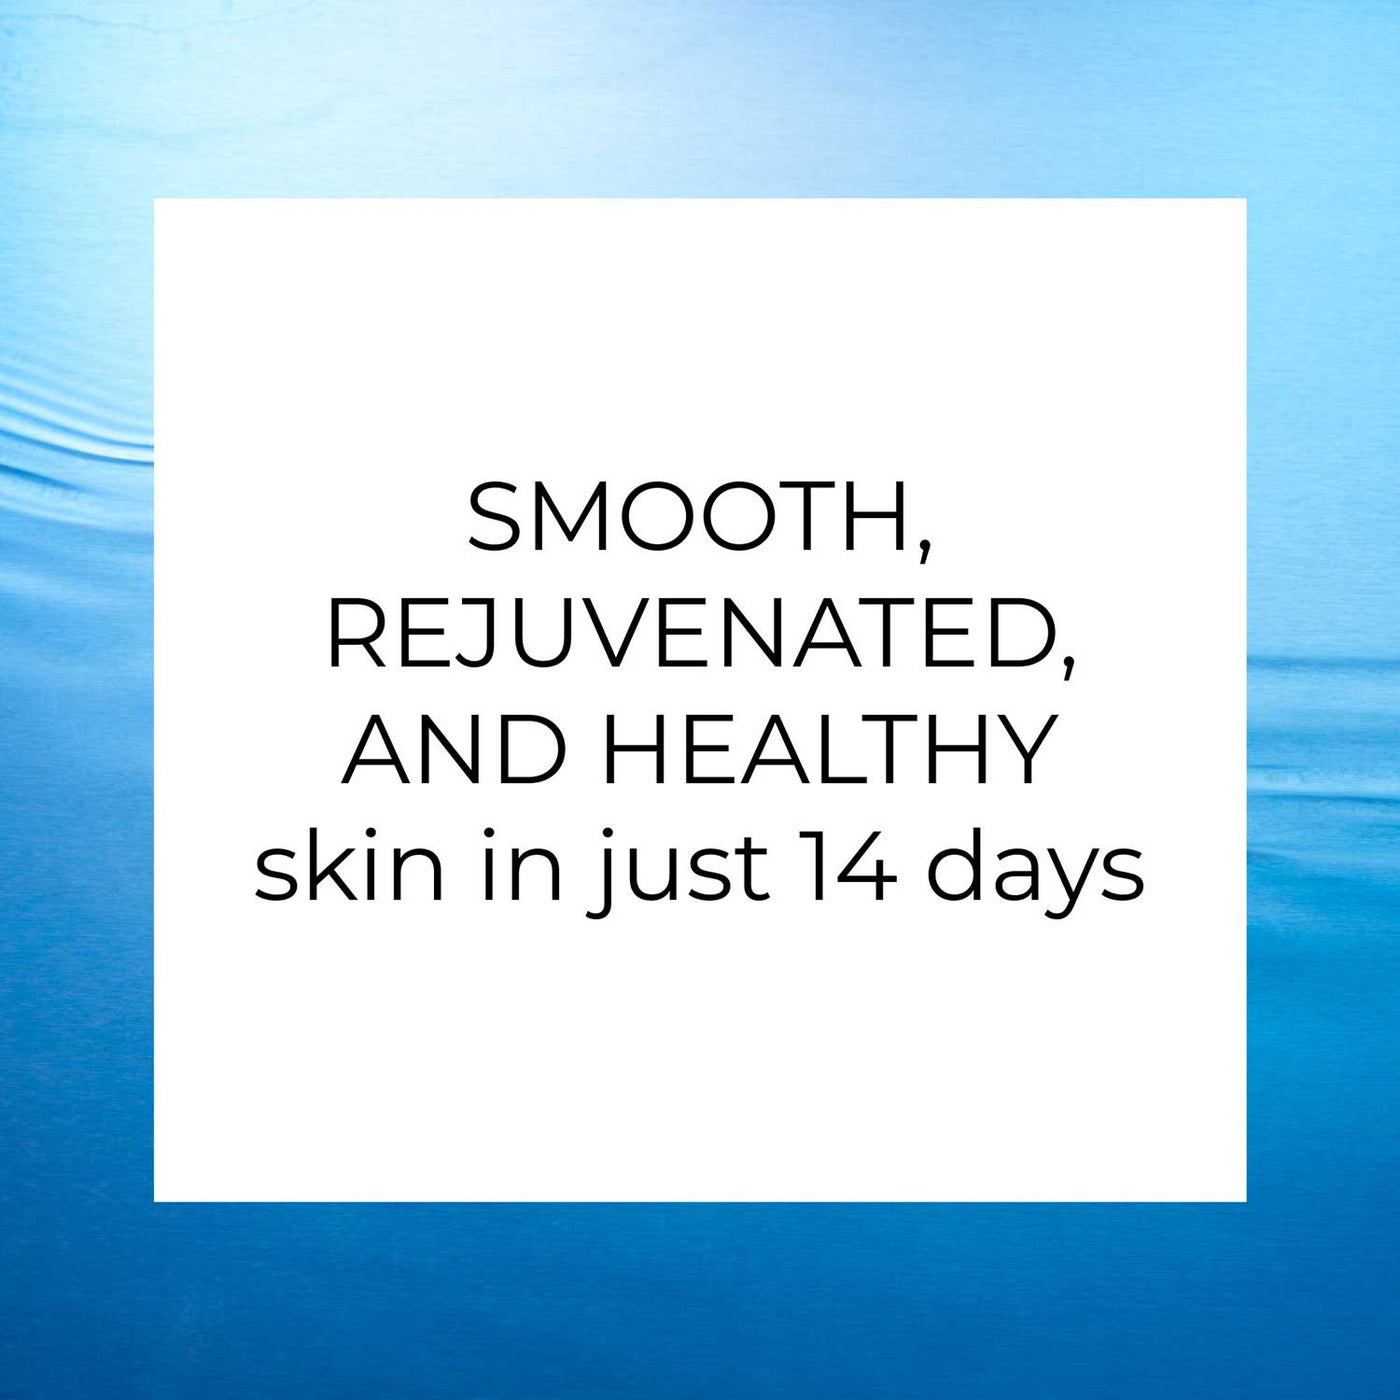 LightWater PM Replenishing Cream facial skincare gives you smooth, rejuvenated, and healthy skin in just 14 days (2 weeks)